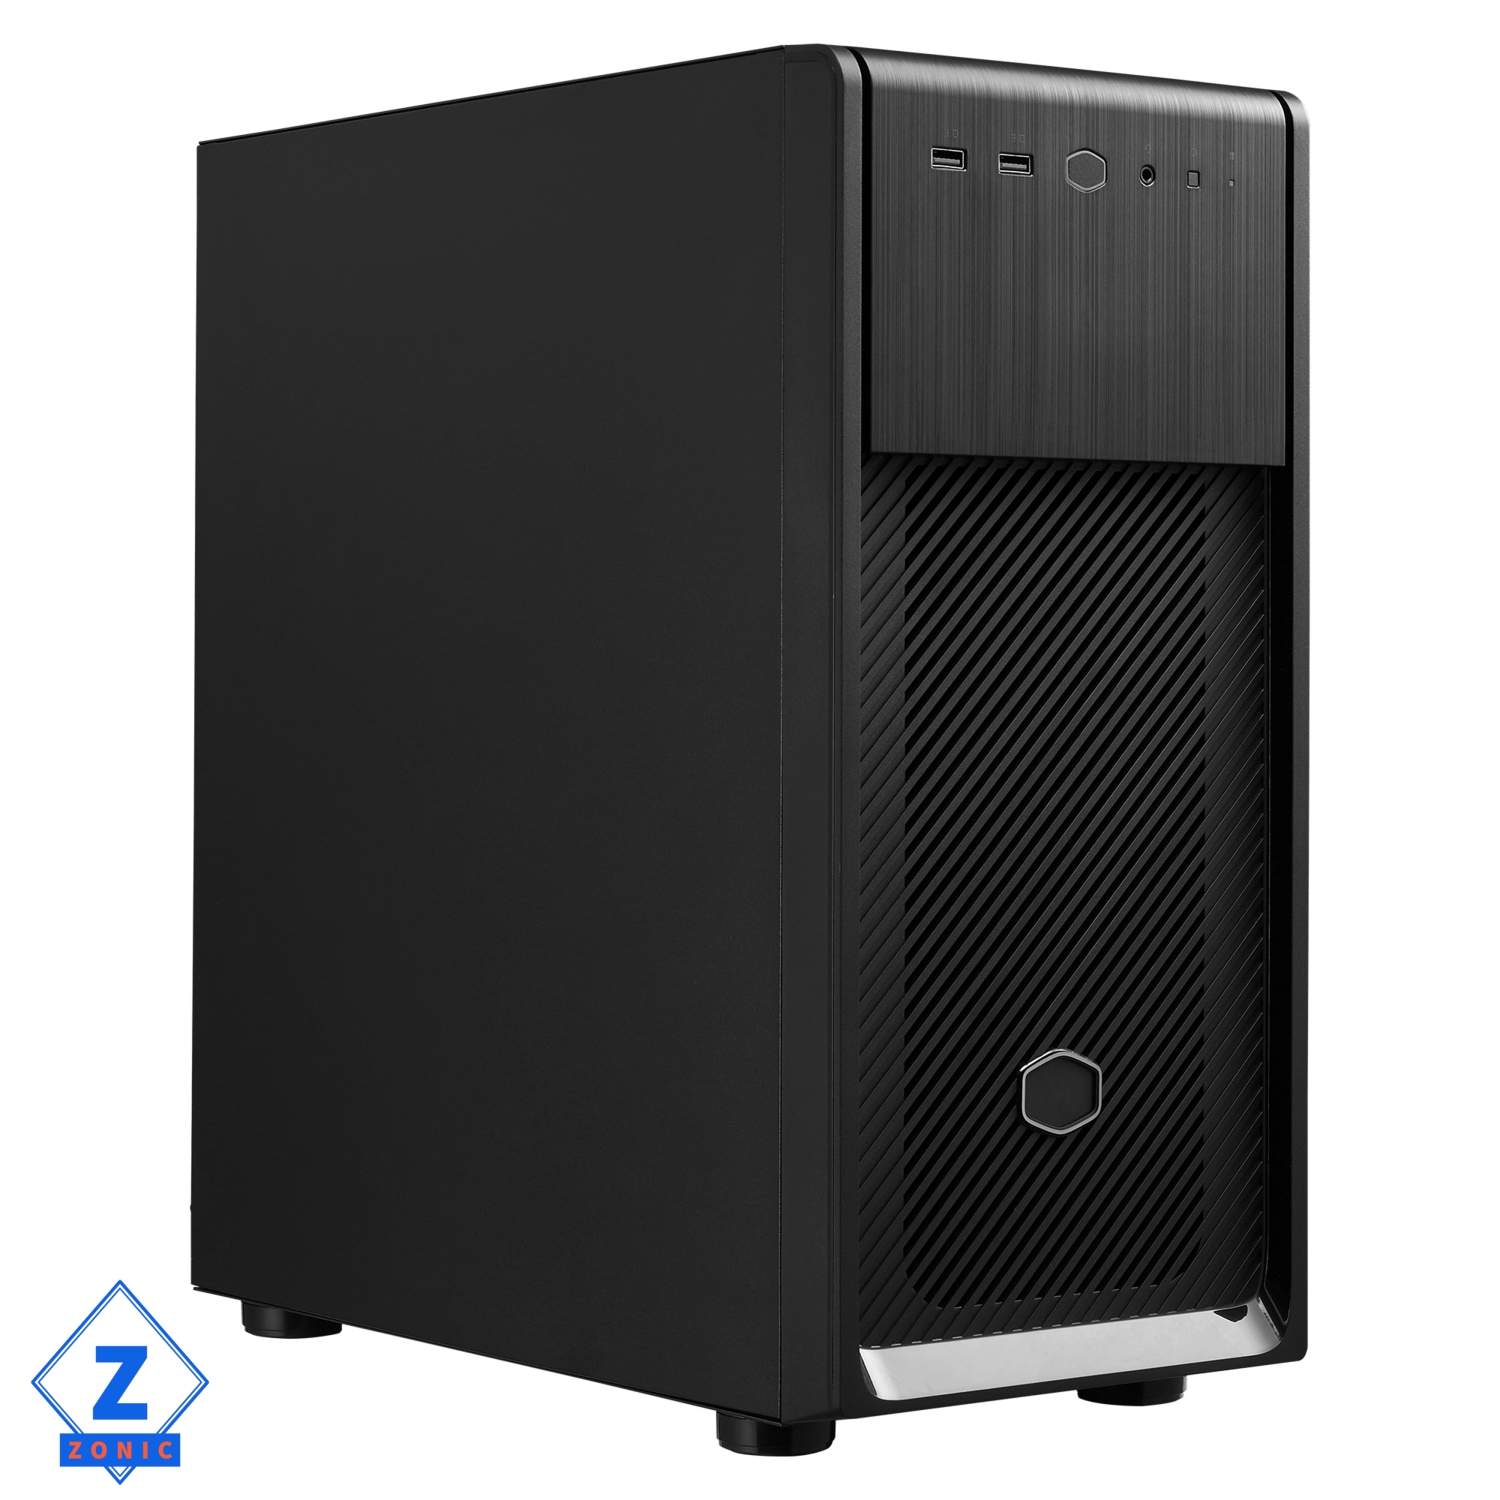 Zonic Business Custom PC, Intel Core i9-12900K, 16 Cores, 2 TB M.2 NVME SSD, 32 GB RAM, Built in Wi-Fi, Keyboard and Mouse, Windows 11 Pro